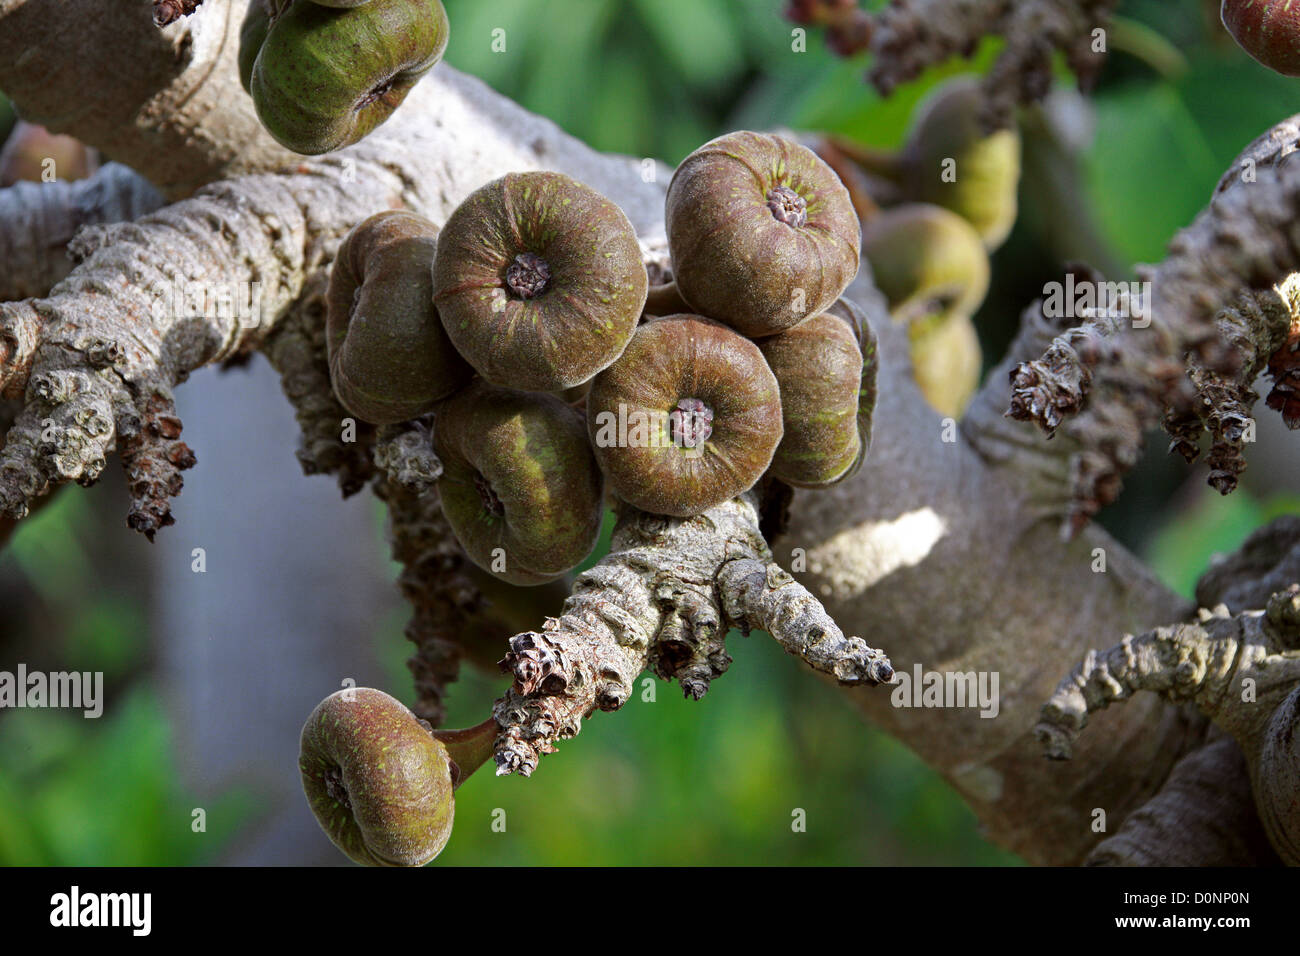 Indian fig hi-res stock photography -